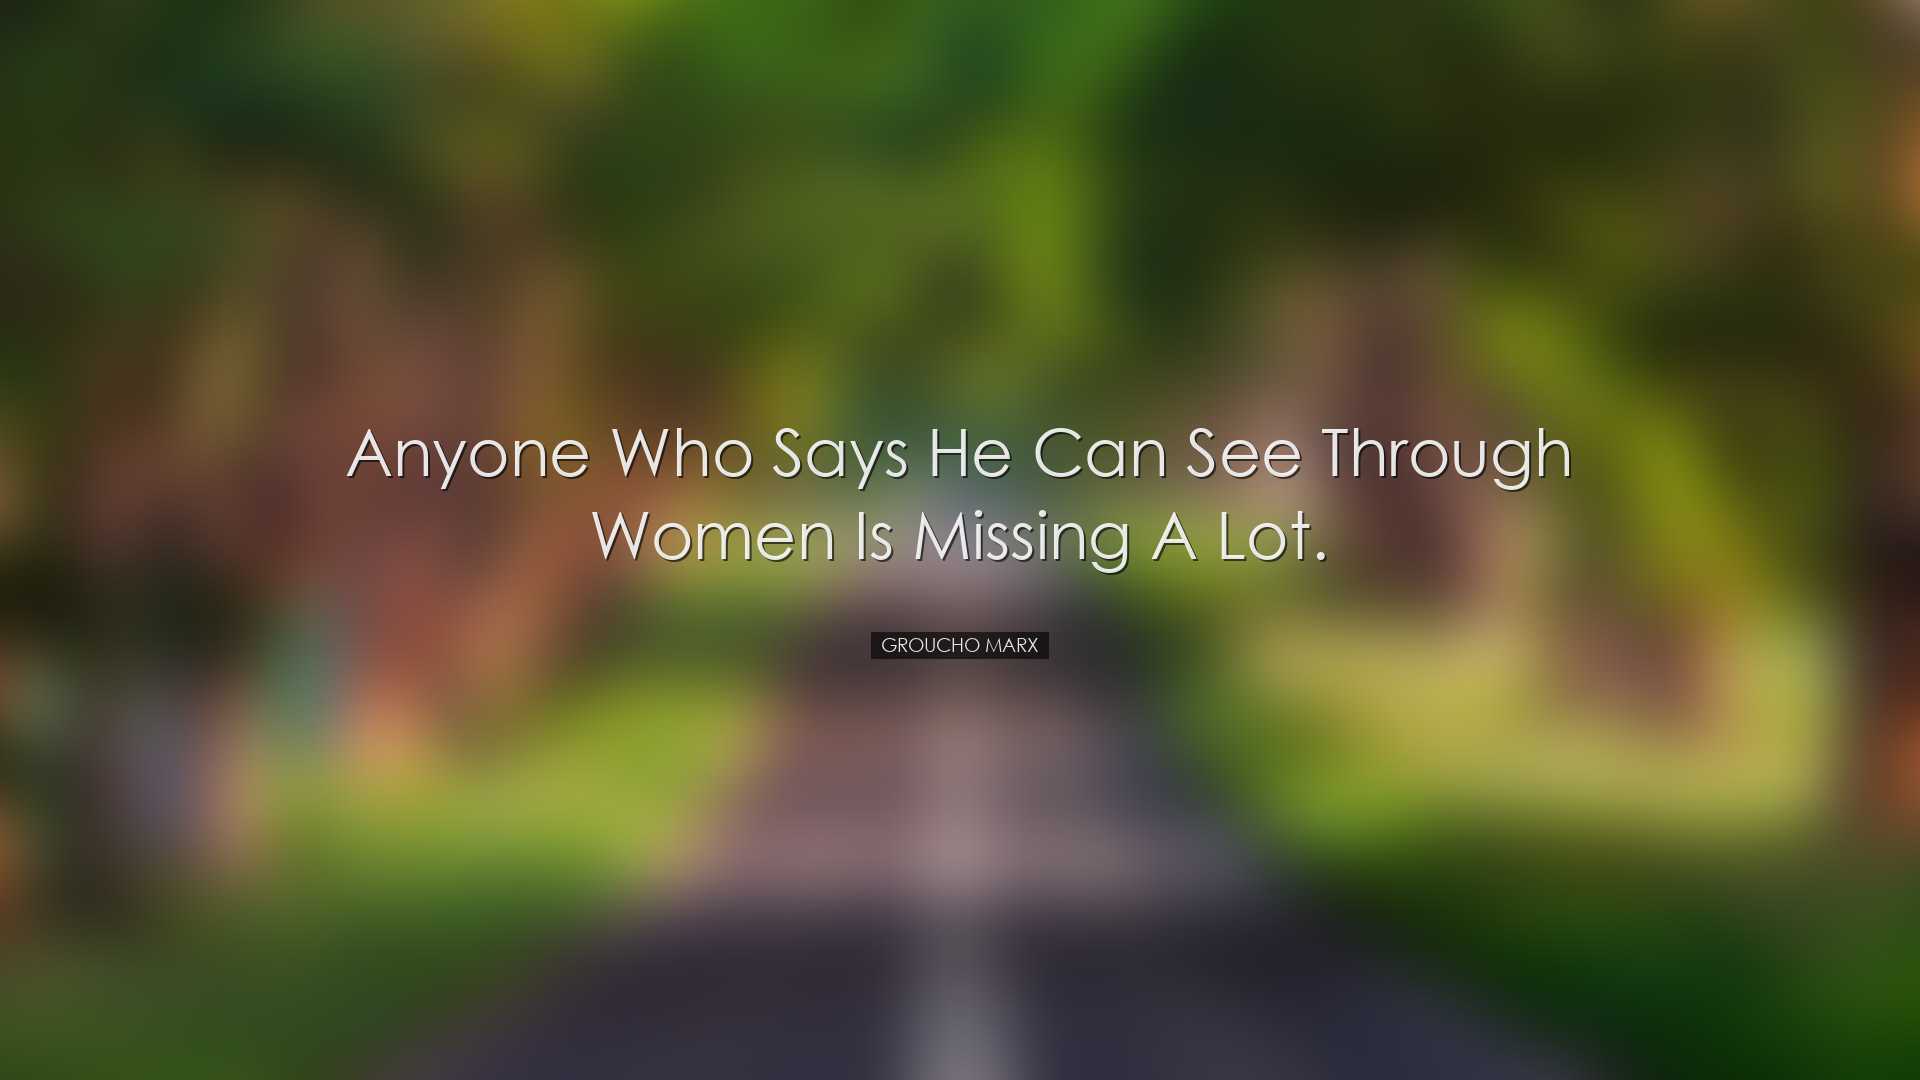 Anyone who says he can see through women is missing a lot. - Grouc